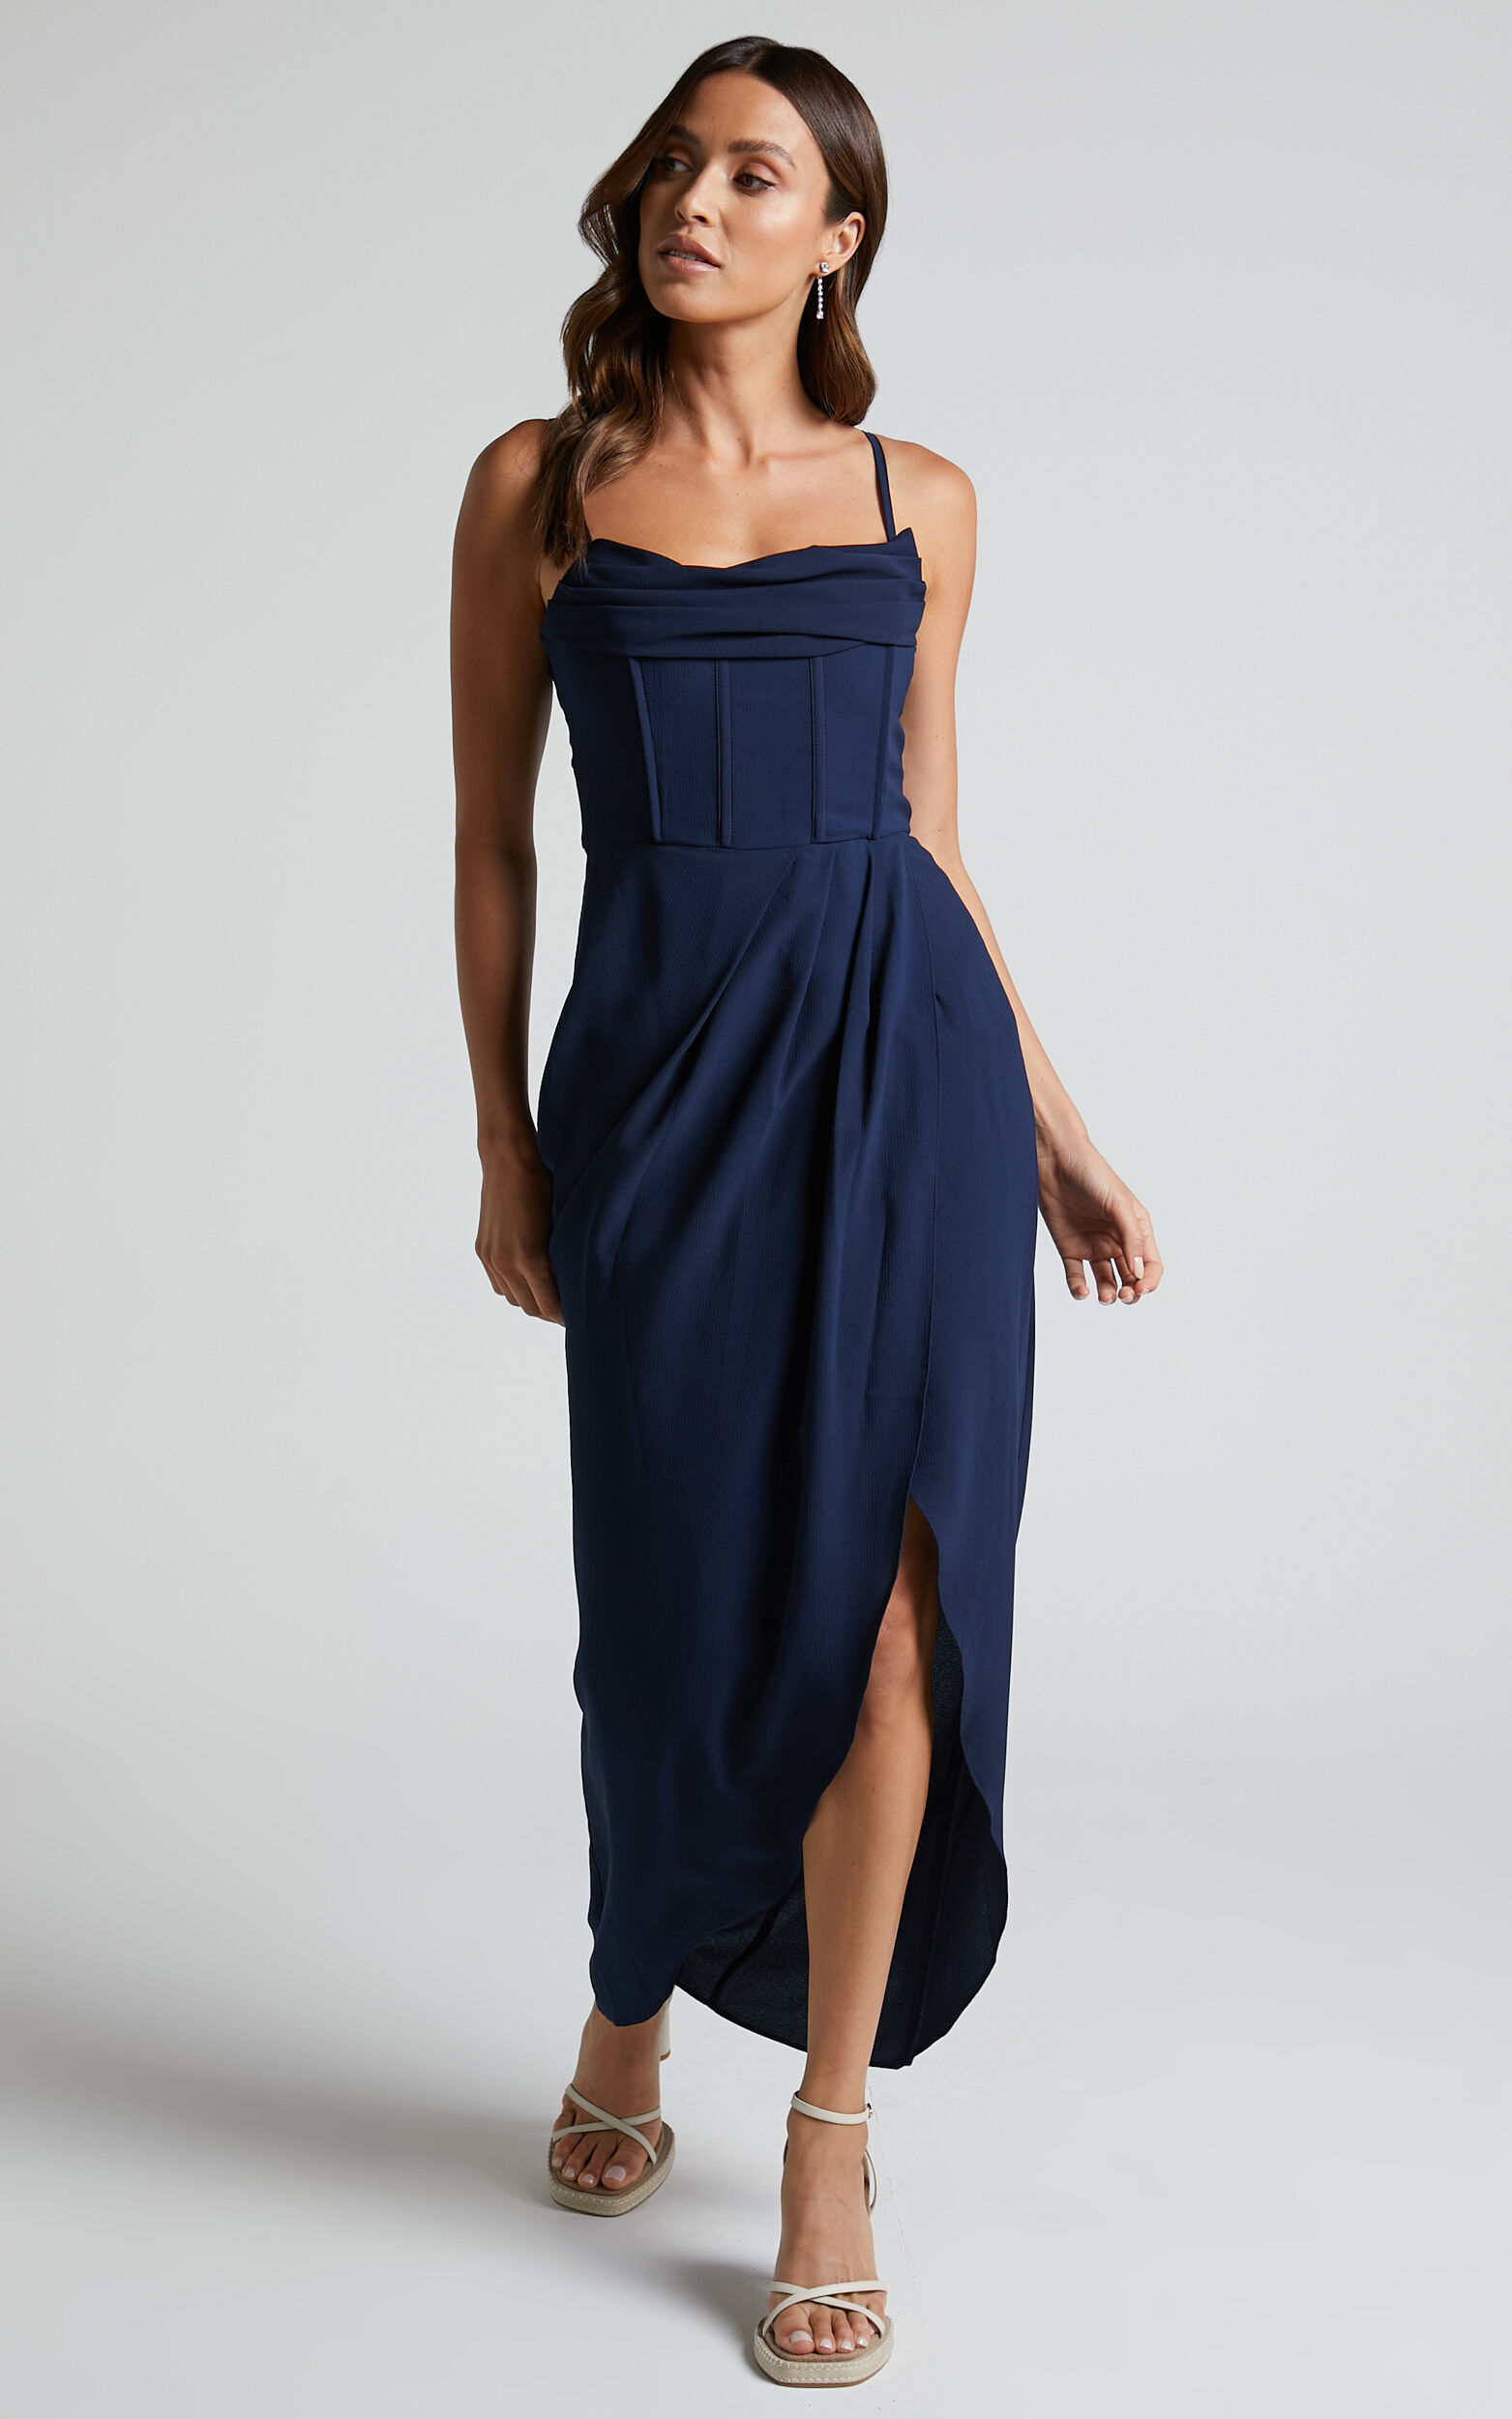 Andrina Midi Dress - High Low Wrap Corset Dress in Navy - 04, NVY3